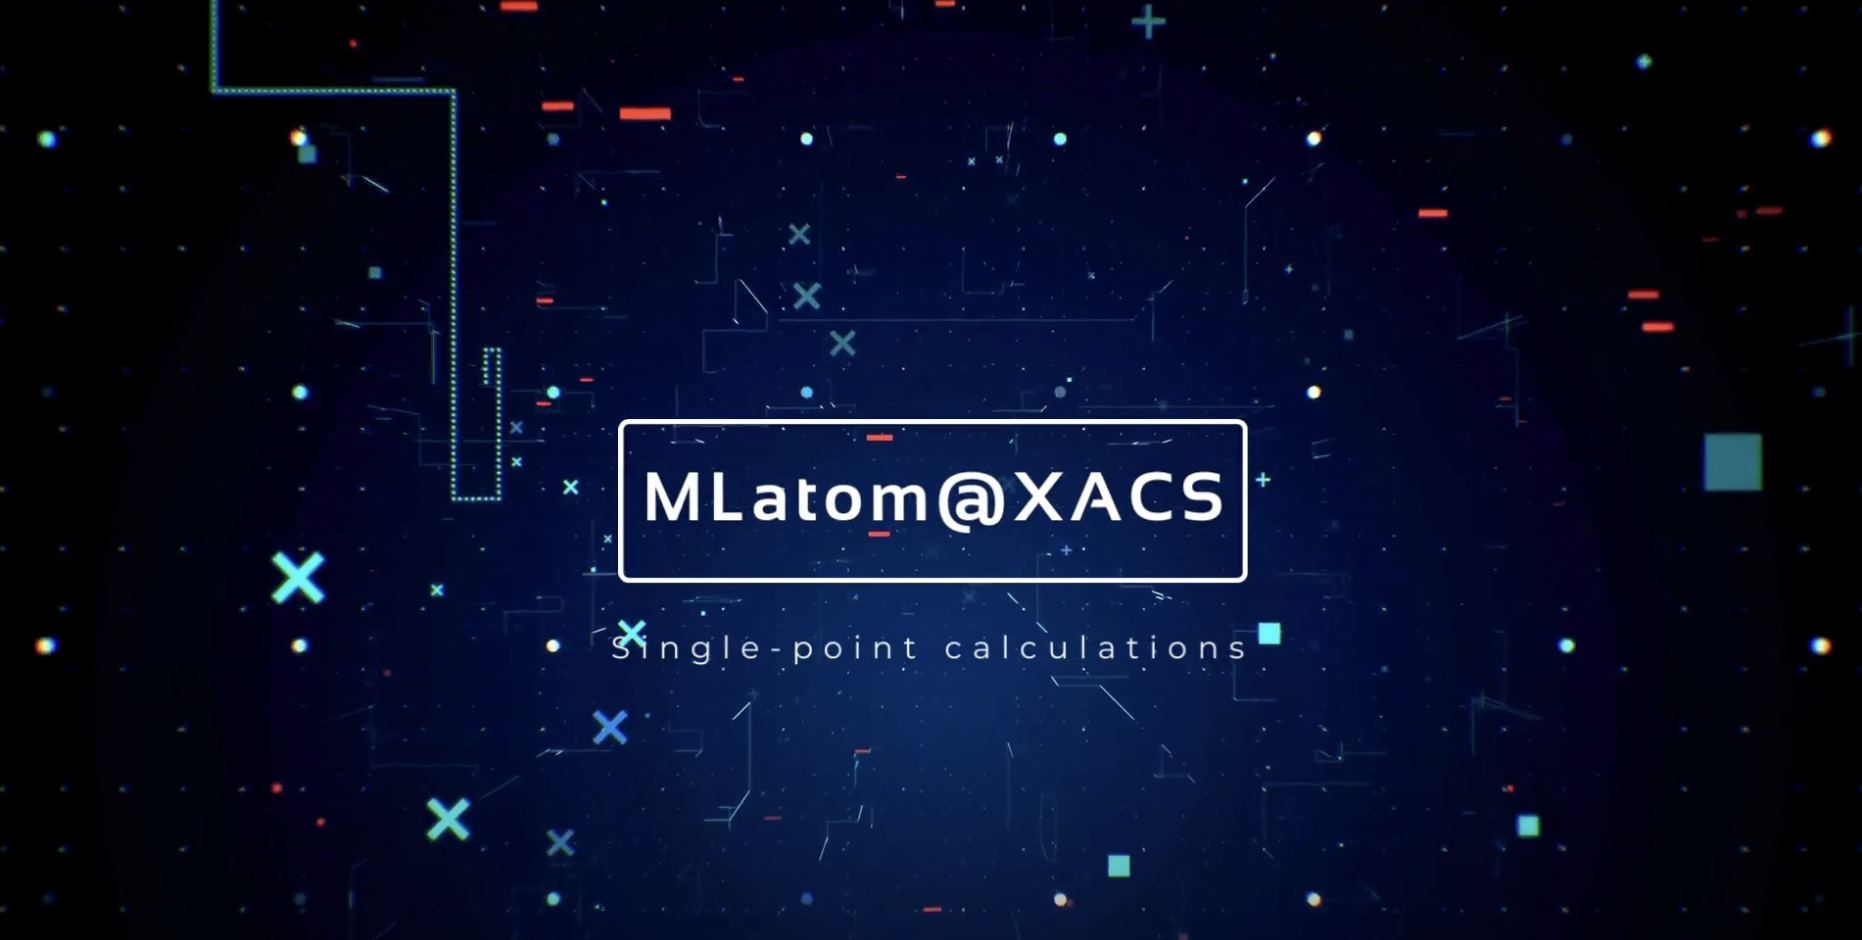 Tutorial on single-point calculations with MLatom@XACS